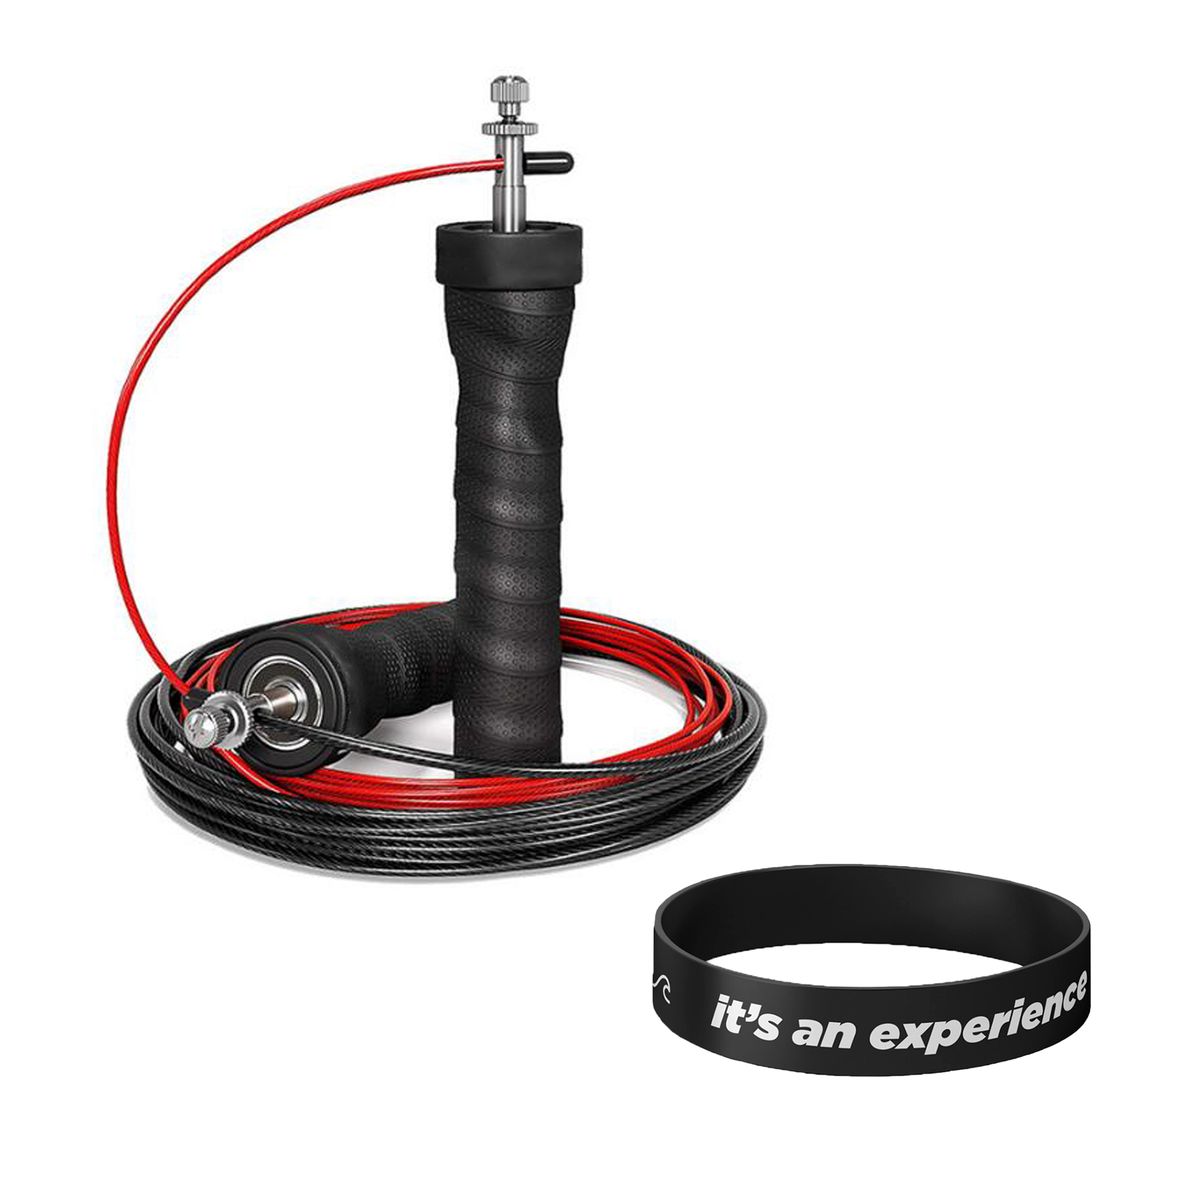 Professional Comba Crossfit Speed Jump The Rope For Boxing Fitness,  Skipping, And Gym Workout Training From Masn, $37.73